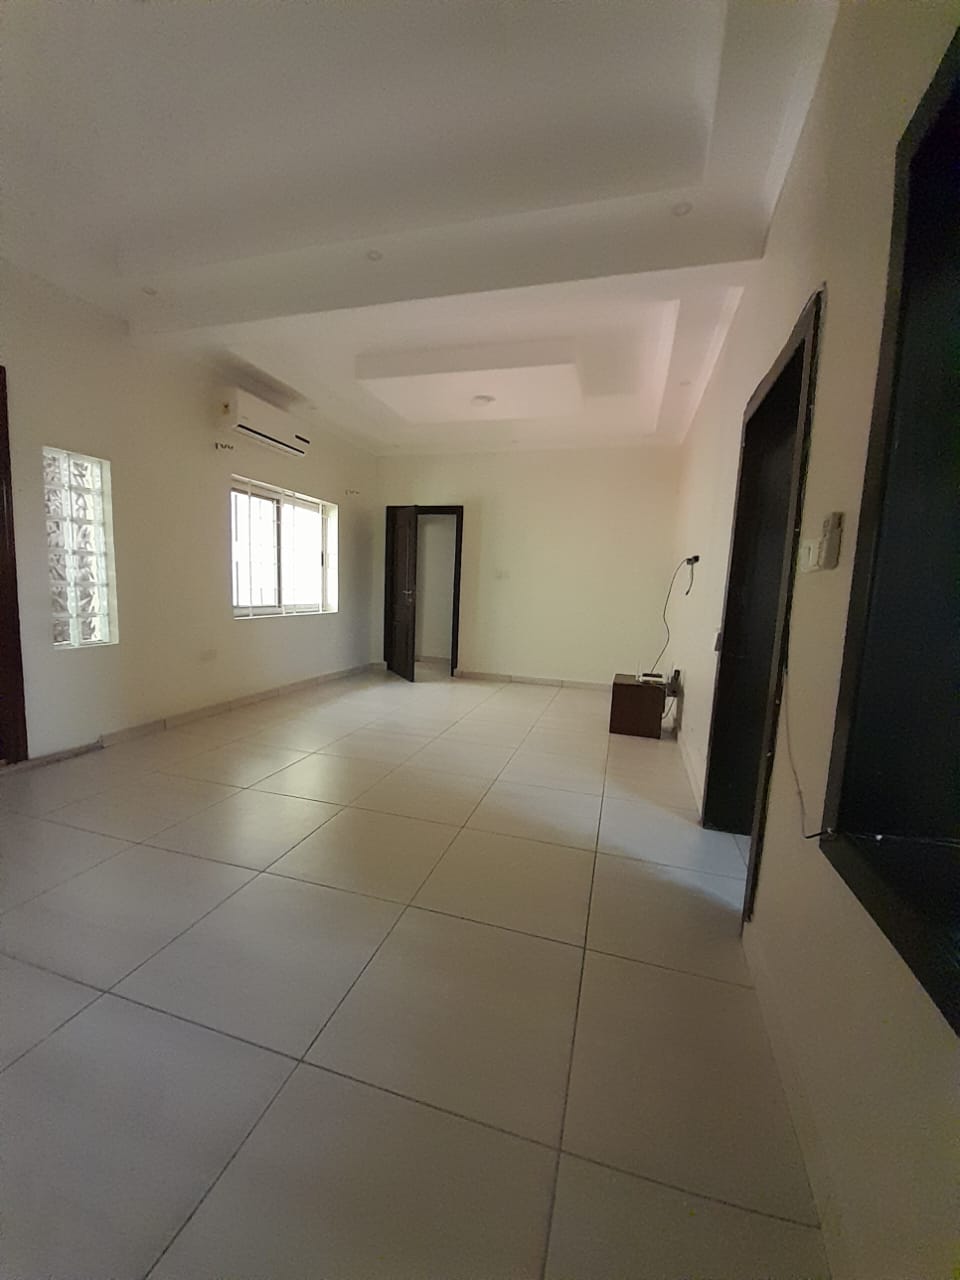 Two 2-Bedroom Unfurnished Apartment for Rent at Labone